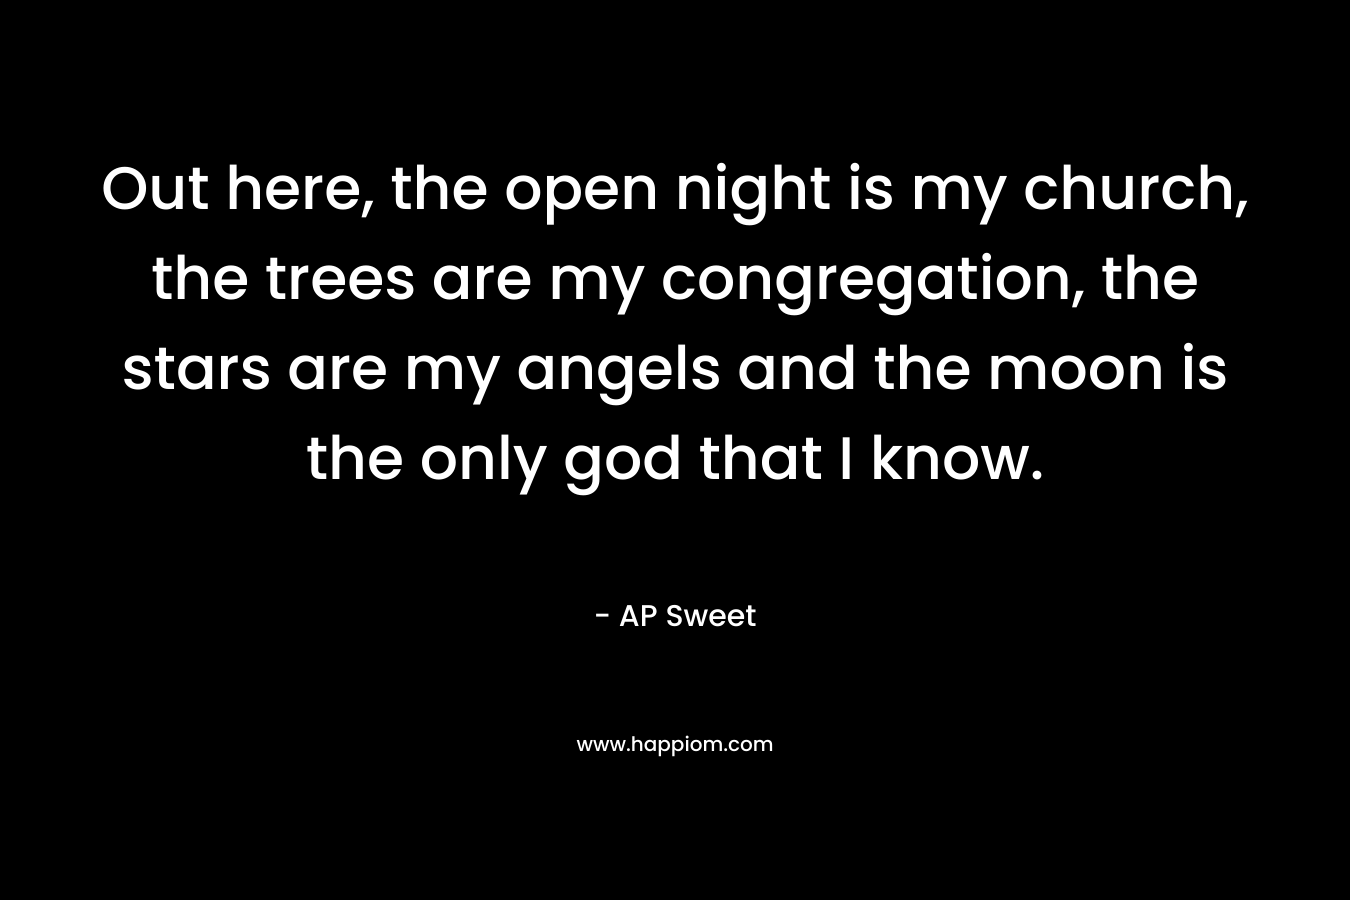 Out here, the open night is my church, the trees are my congregation, the stars are my angels and the moon is the only god that I know. – AP Sweet